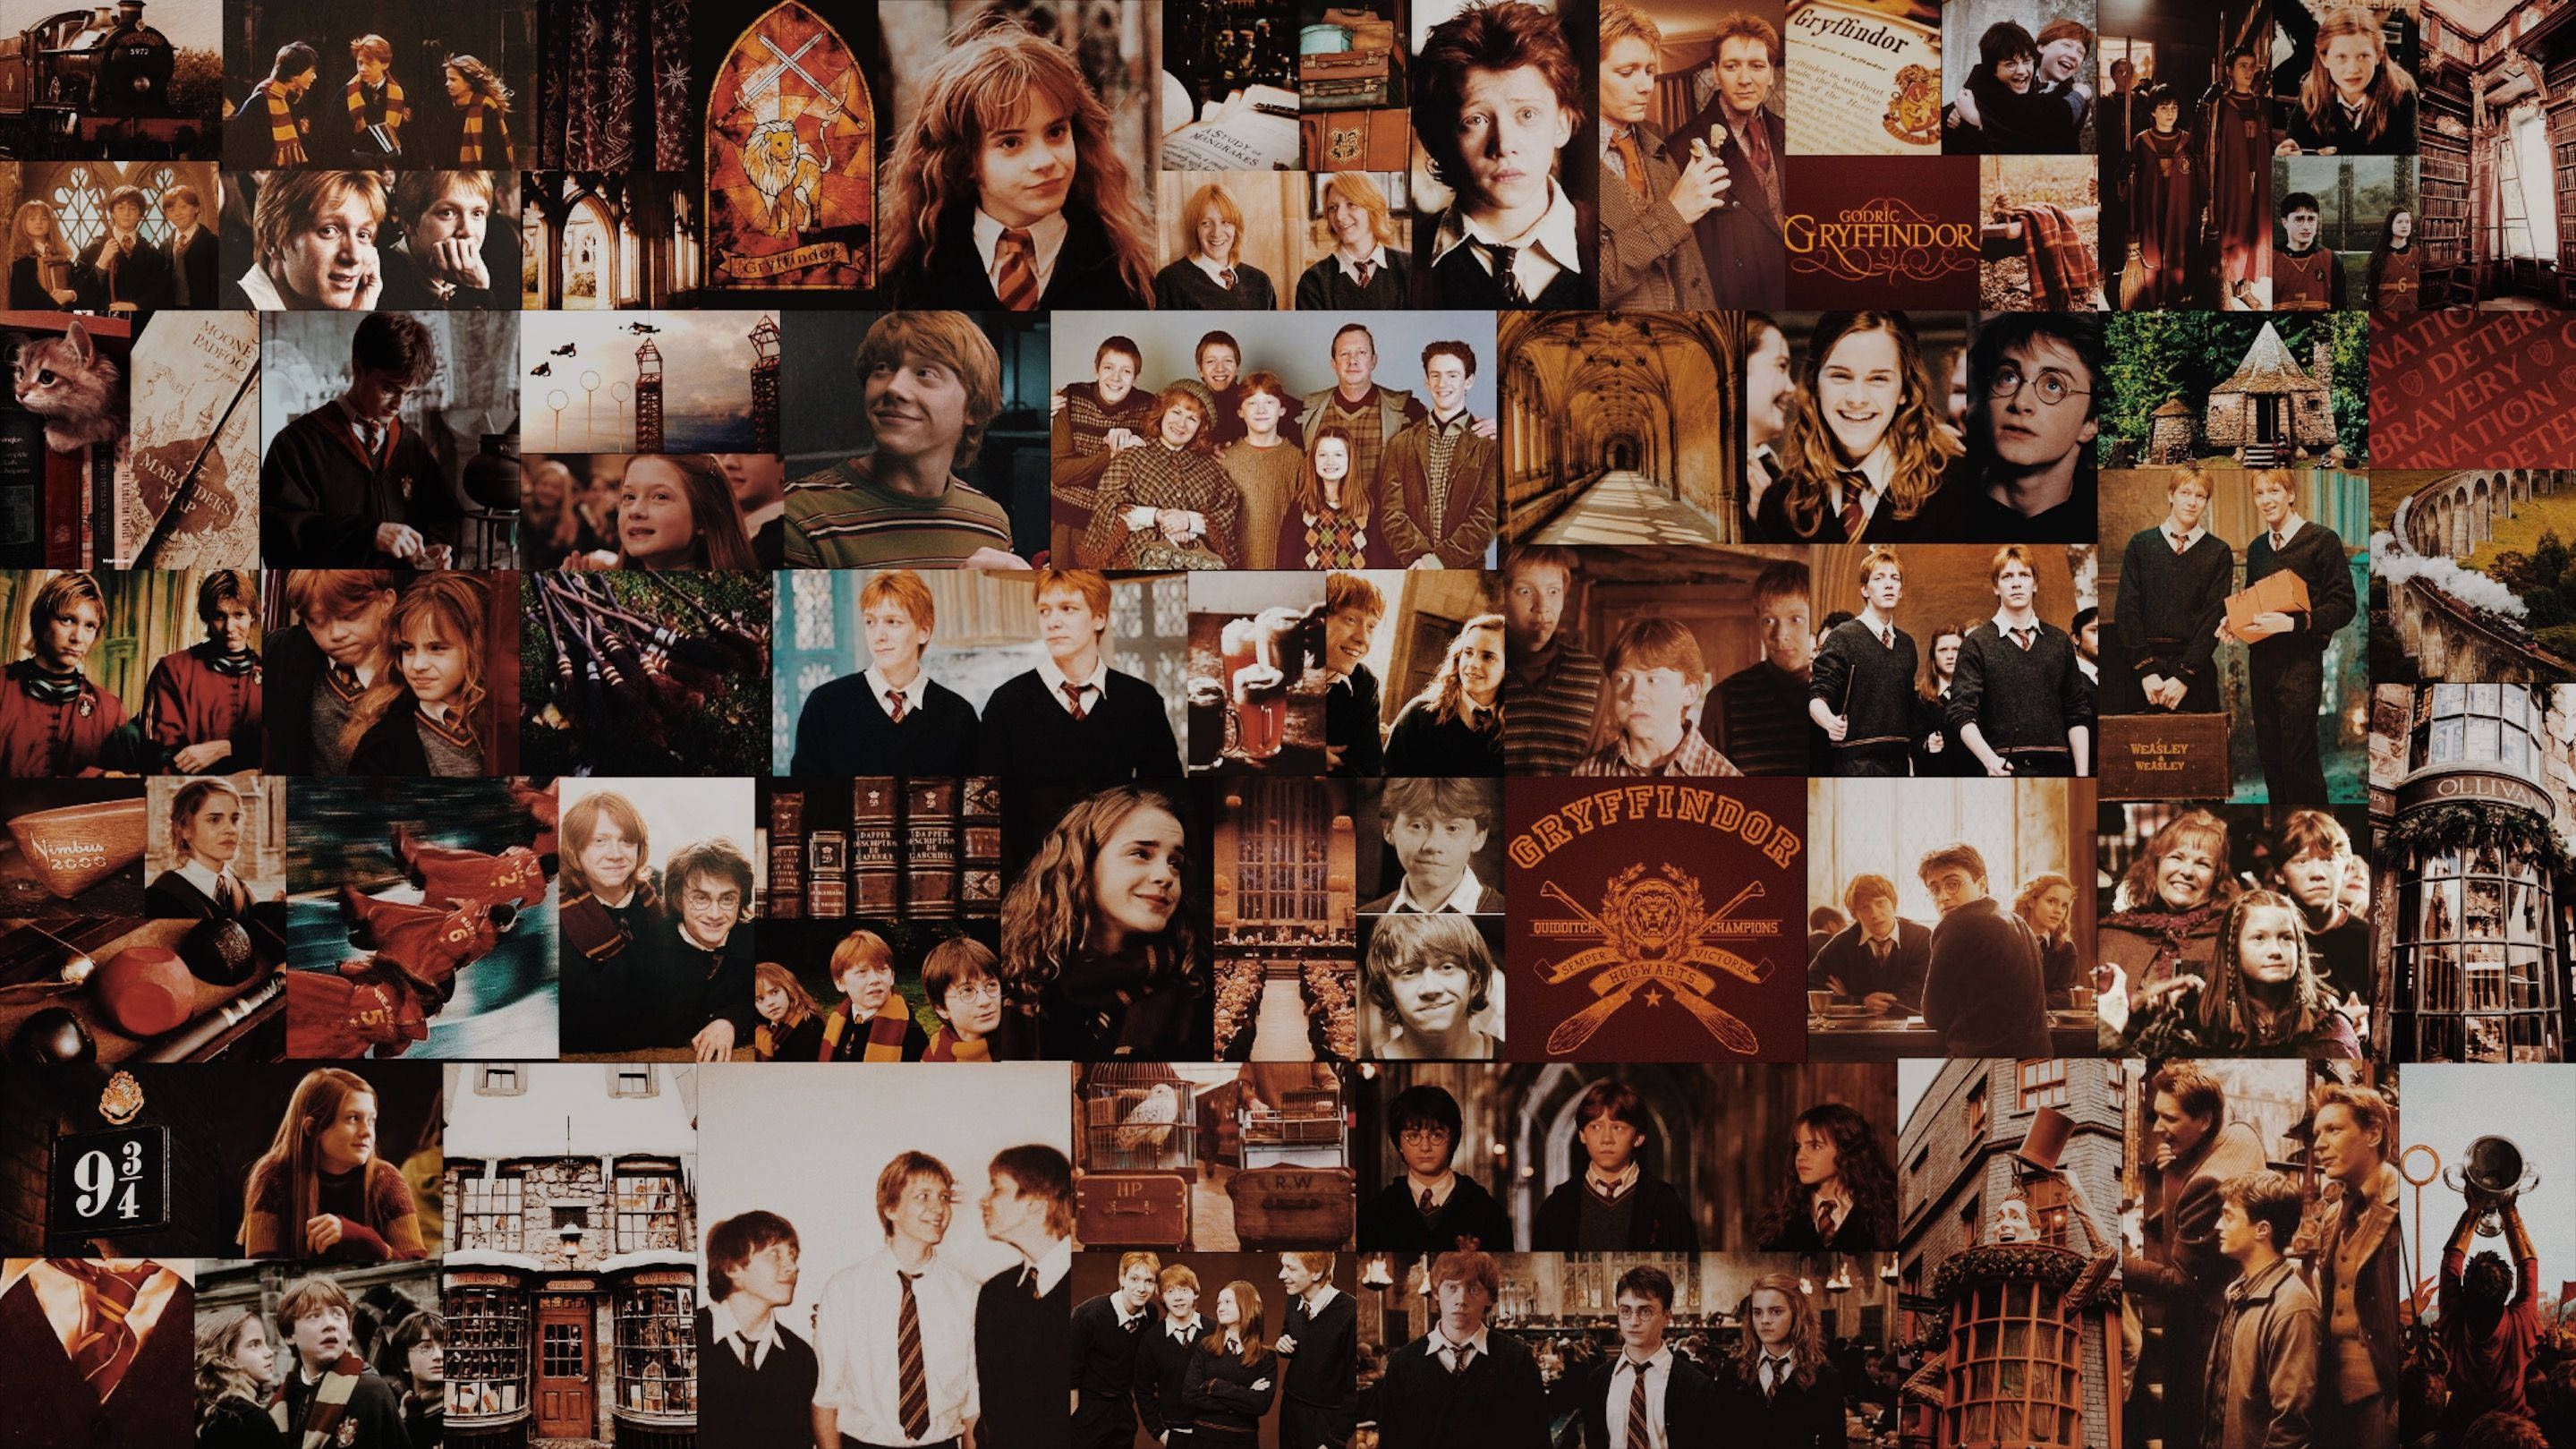 Harry Potter wallpaper with many different pictures of the characters - Harry Potter, Gryffindor